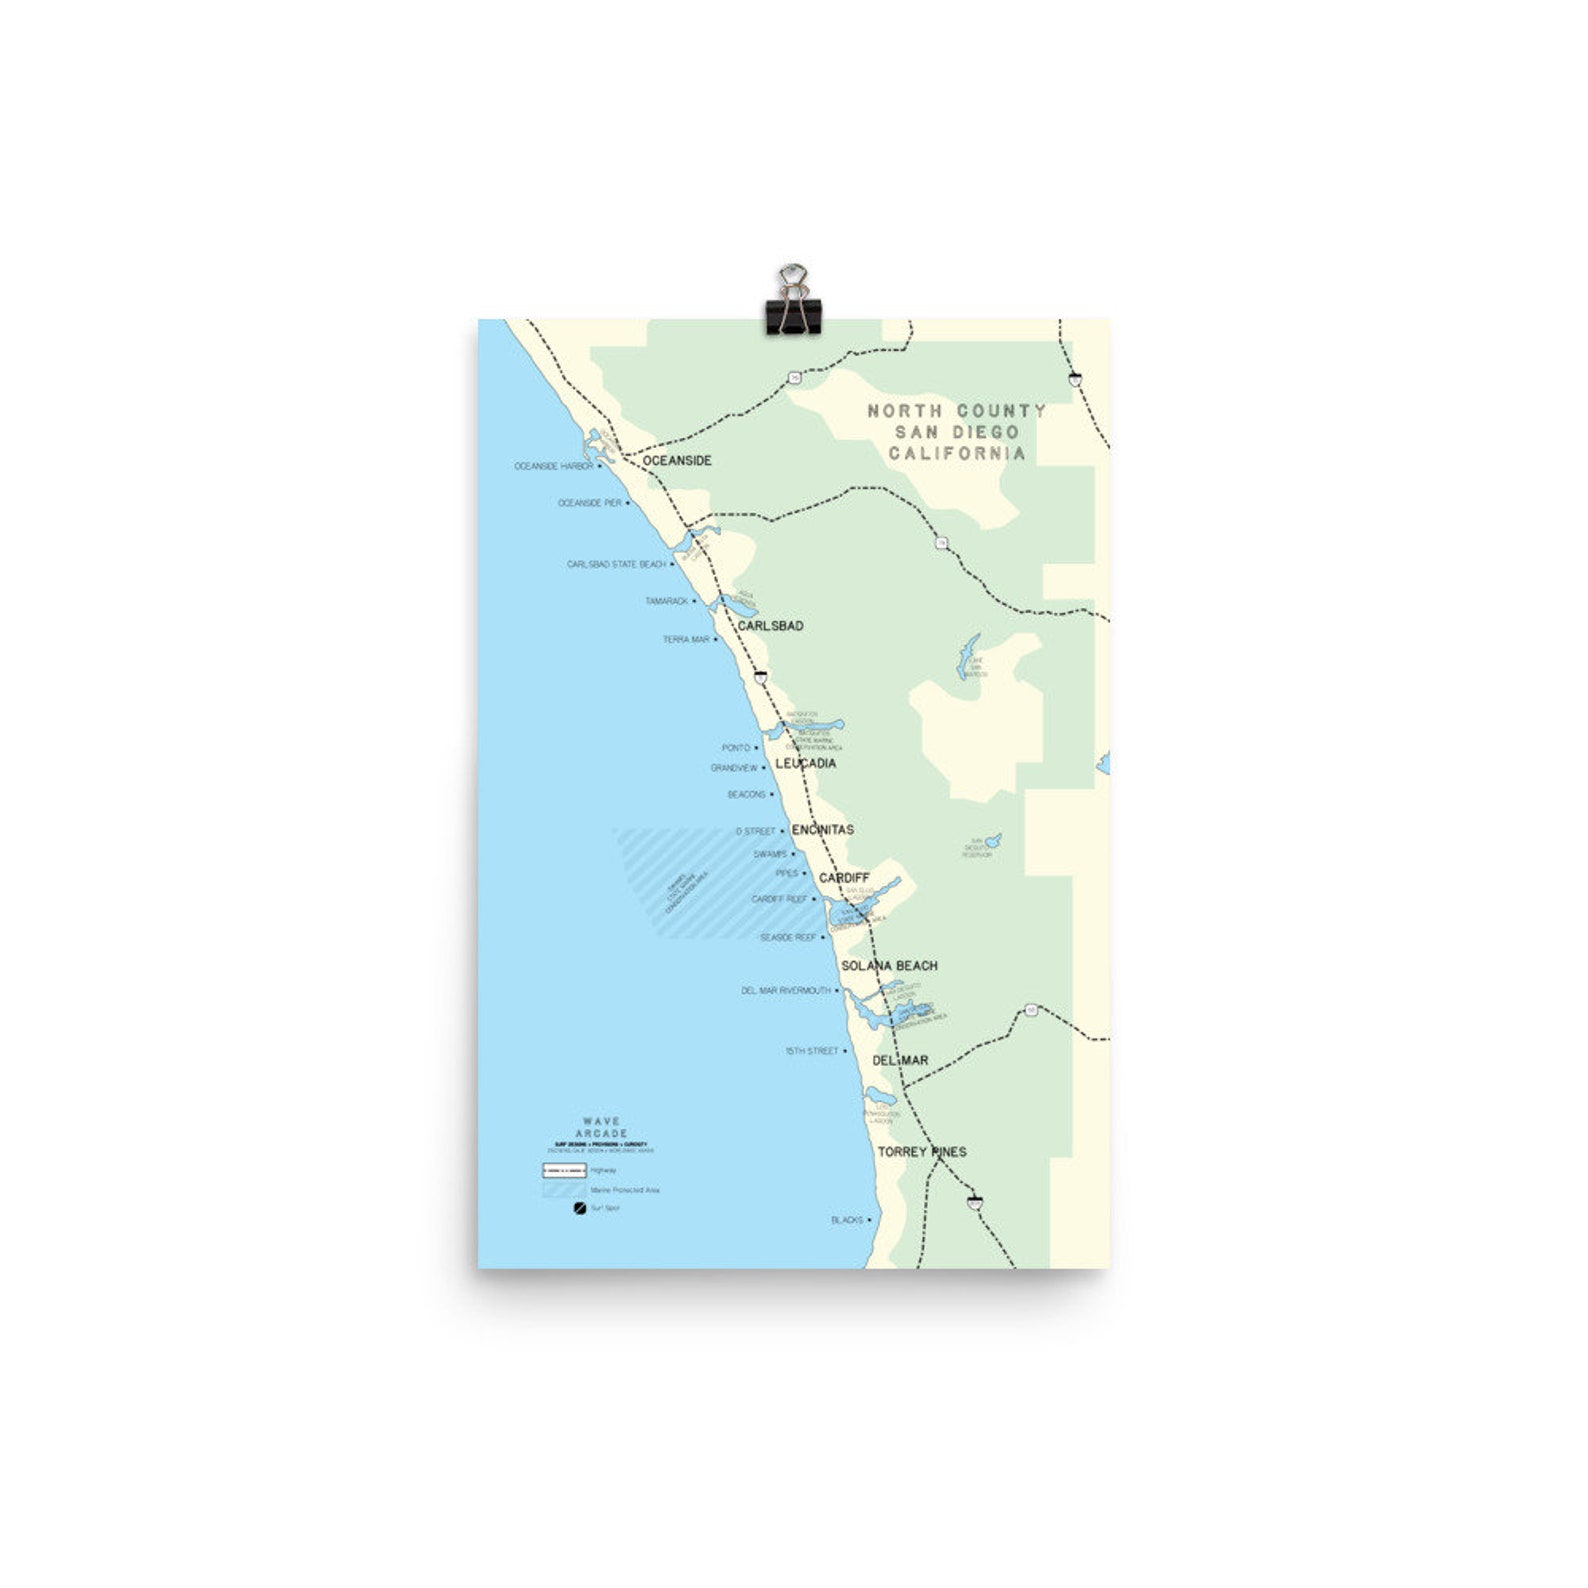 North County San Diego California Surf Spot Map Holiday Etsy